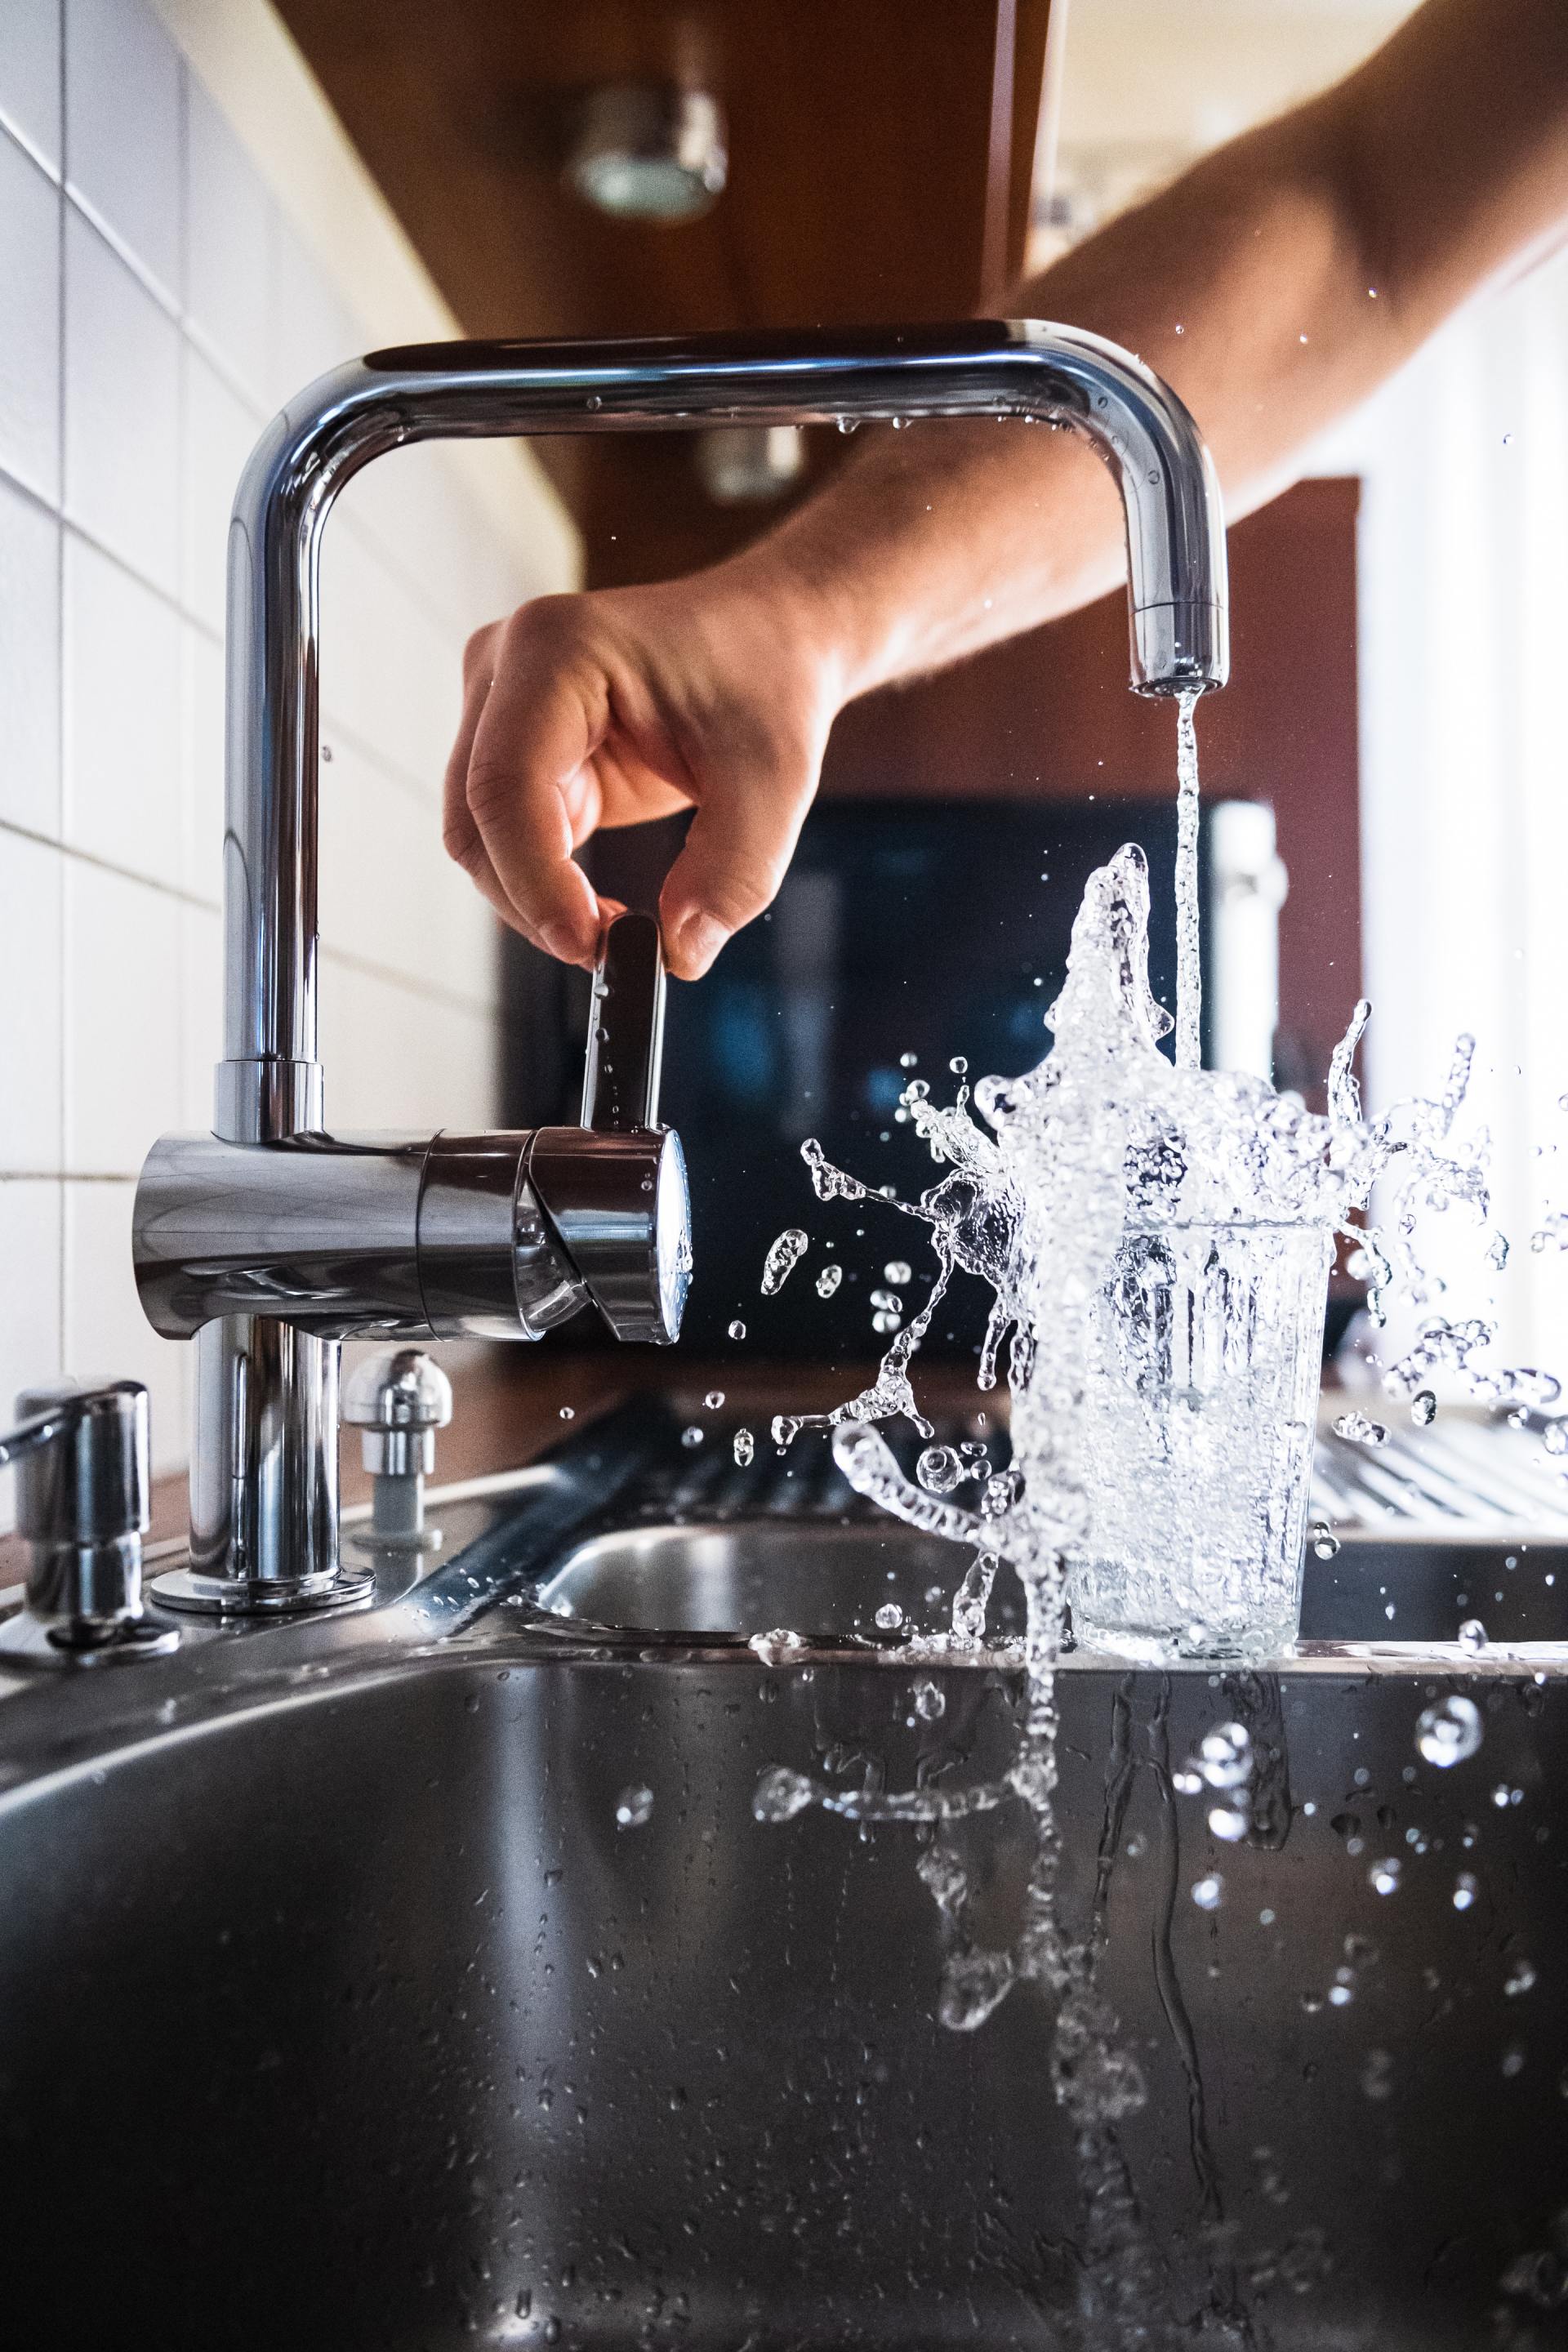 A person is pouring water from a faucet into a sink.